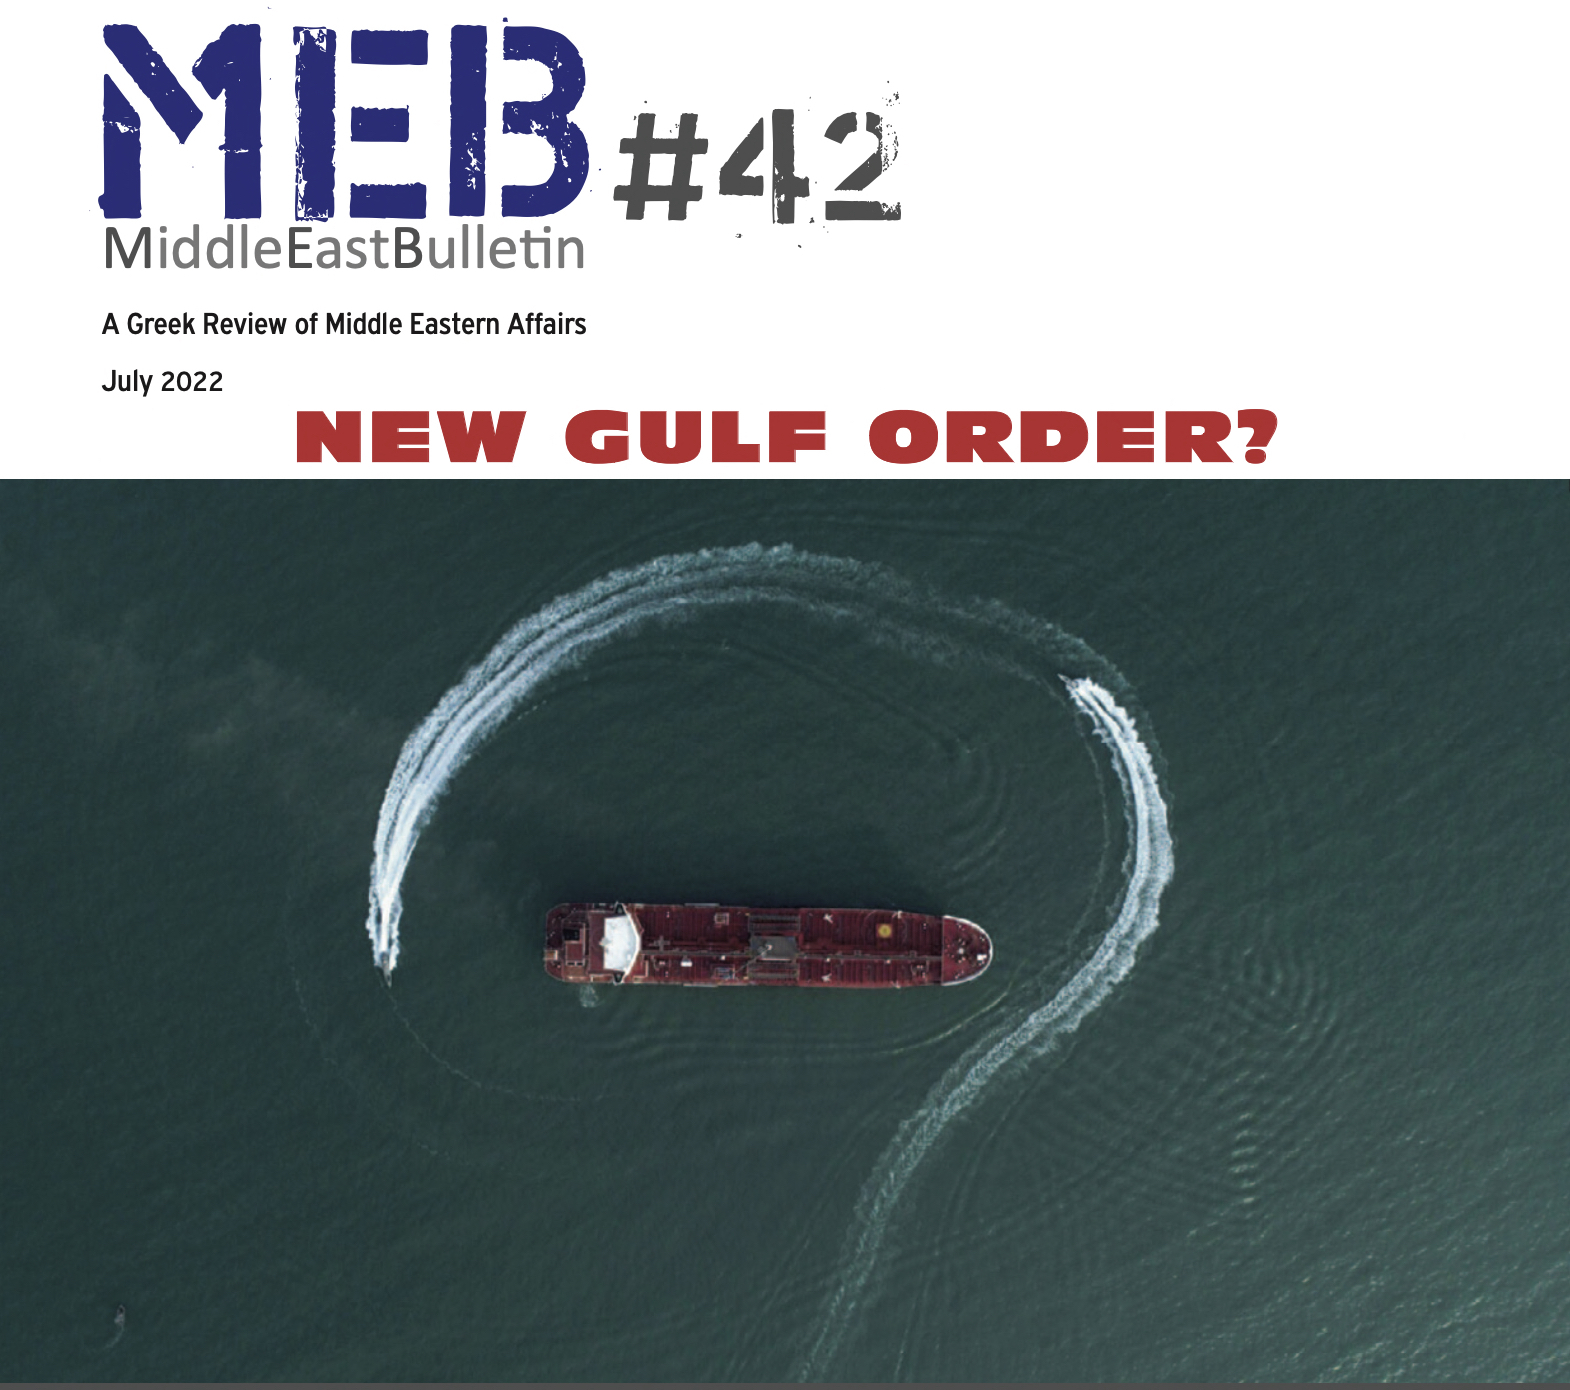 INew Gulf Order? | Middle East Bulletin 42